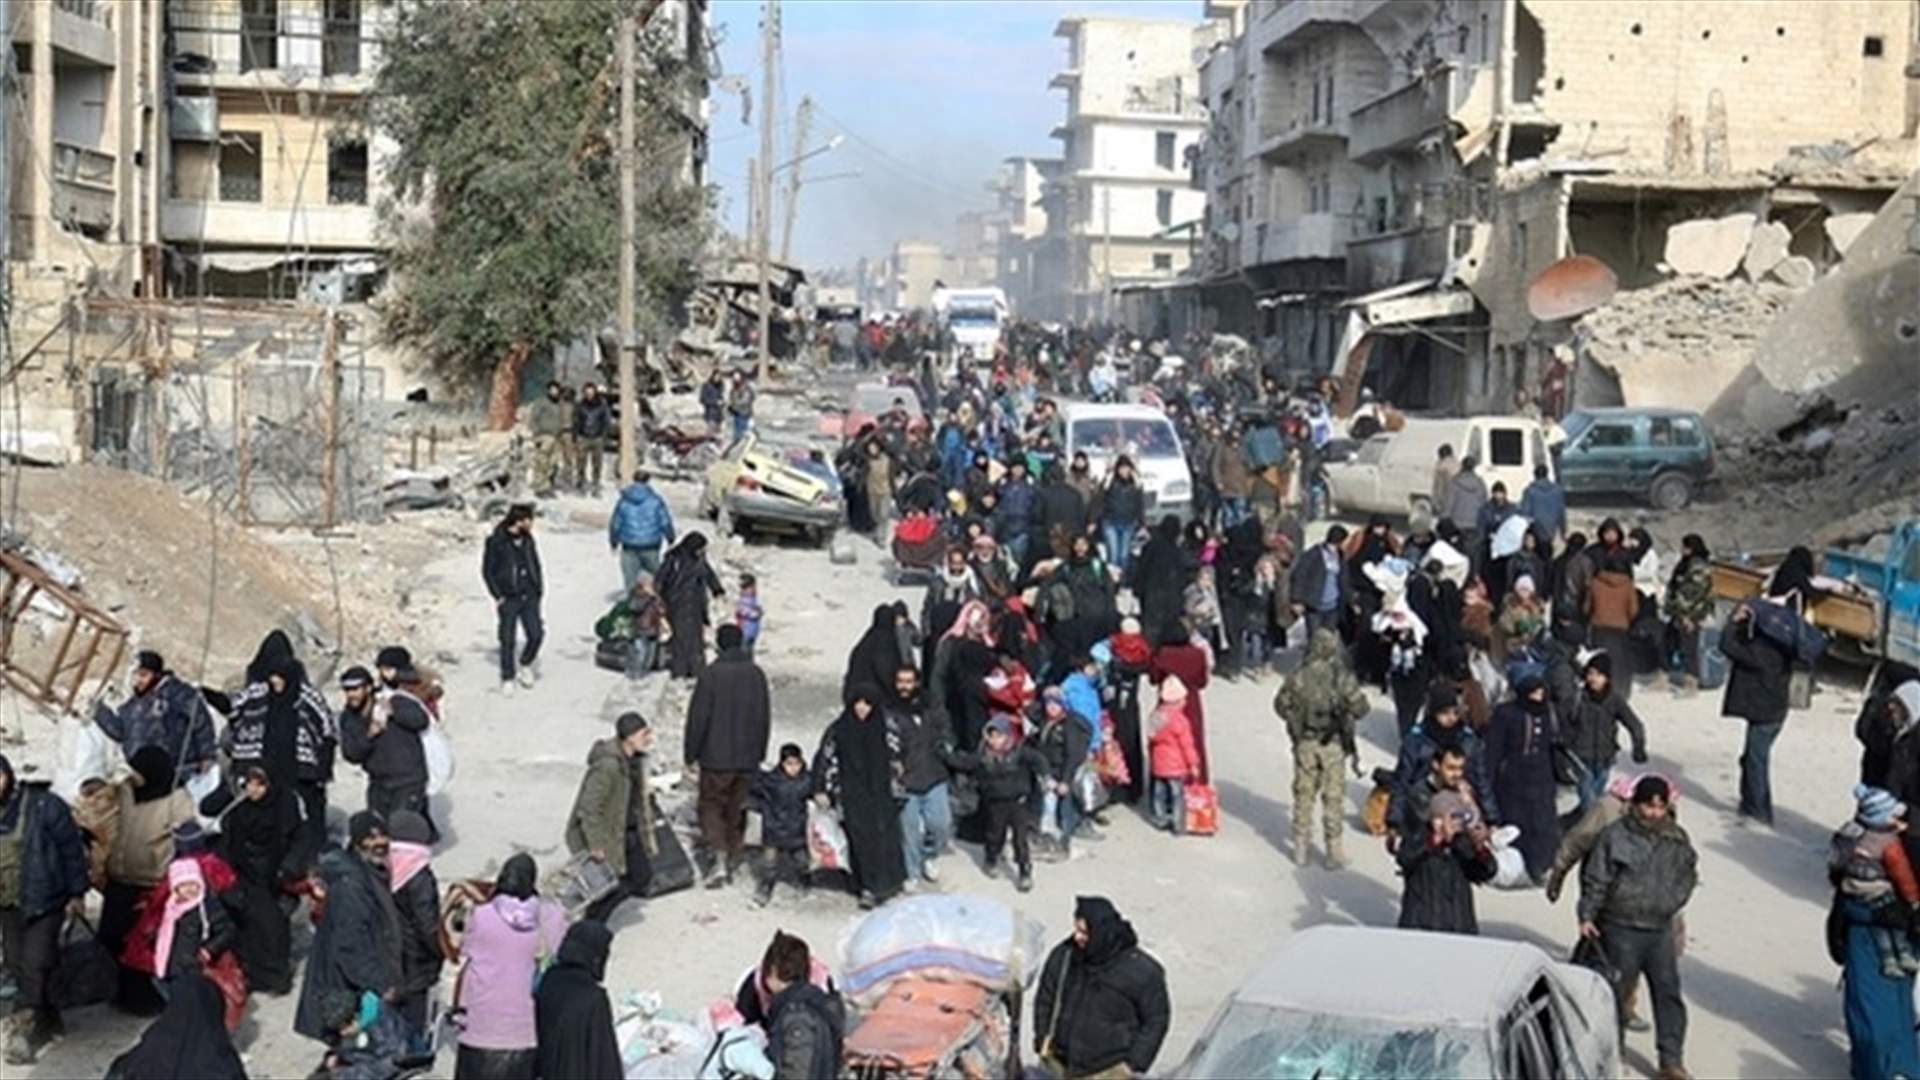 Thousands of civilians, fighters waiting to leave Aleppo -rebels